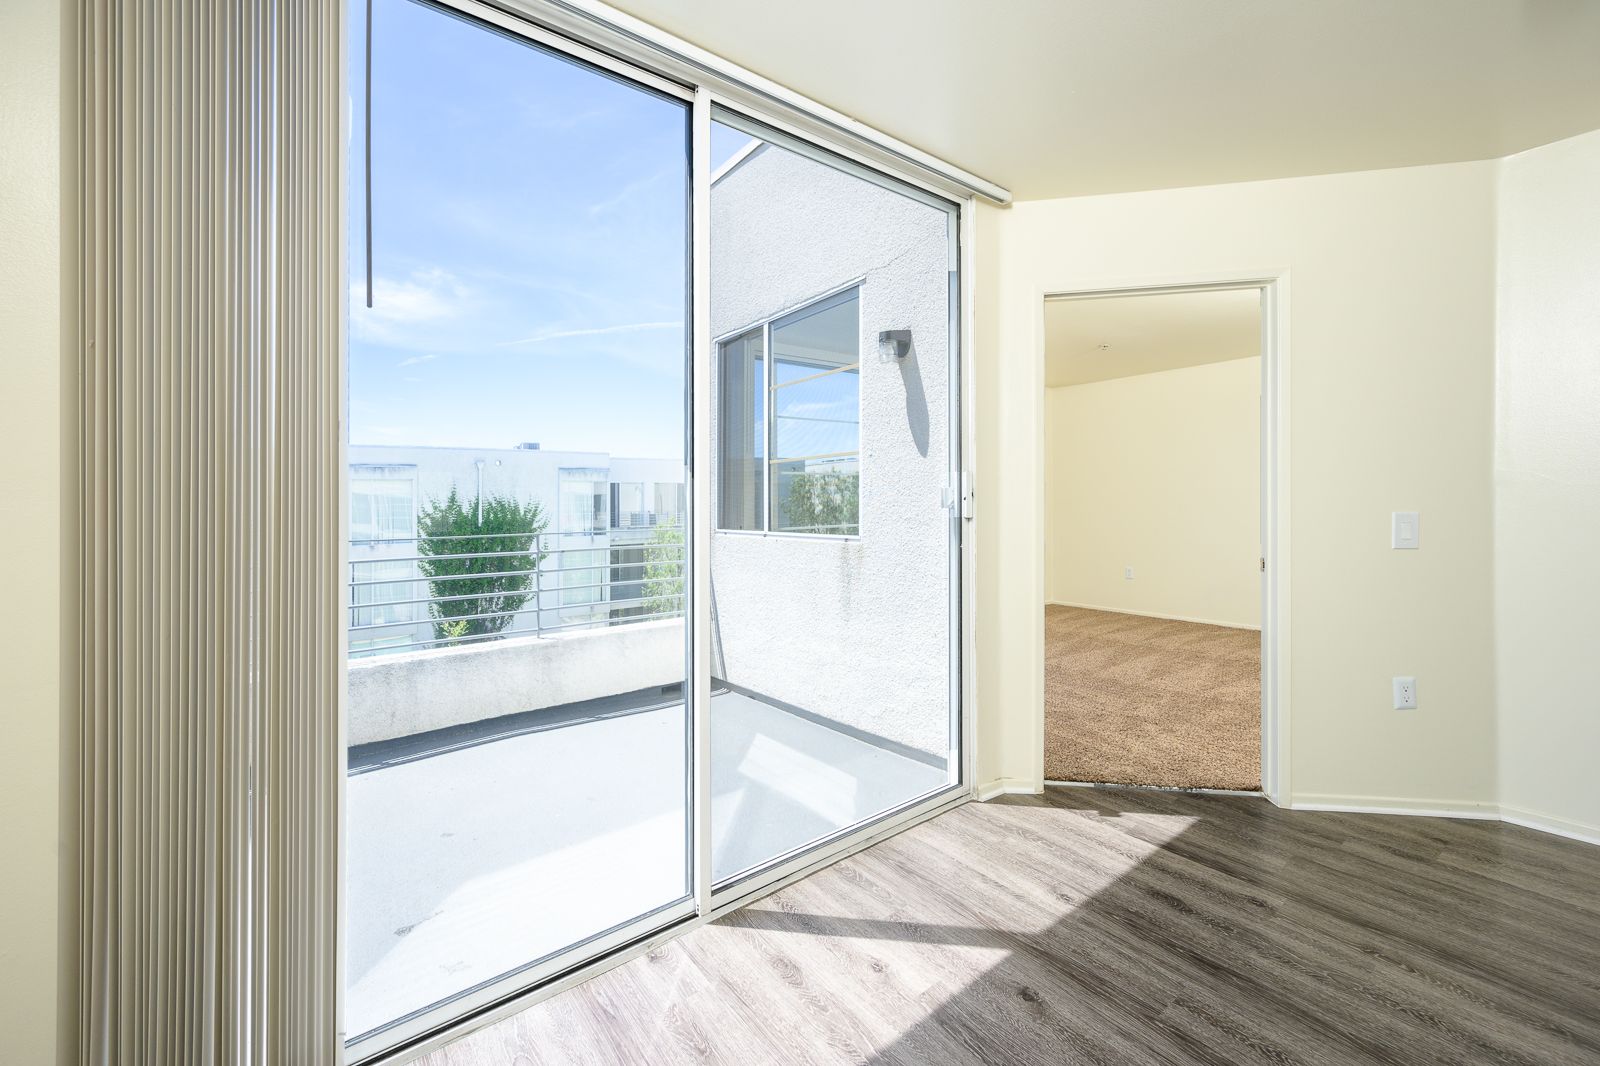 Balcony view from inside a vacant unit. Wood flooring leads to a large, glass sliding door that opens to an outdoor balcony.